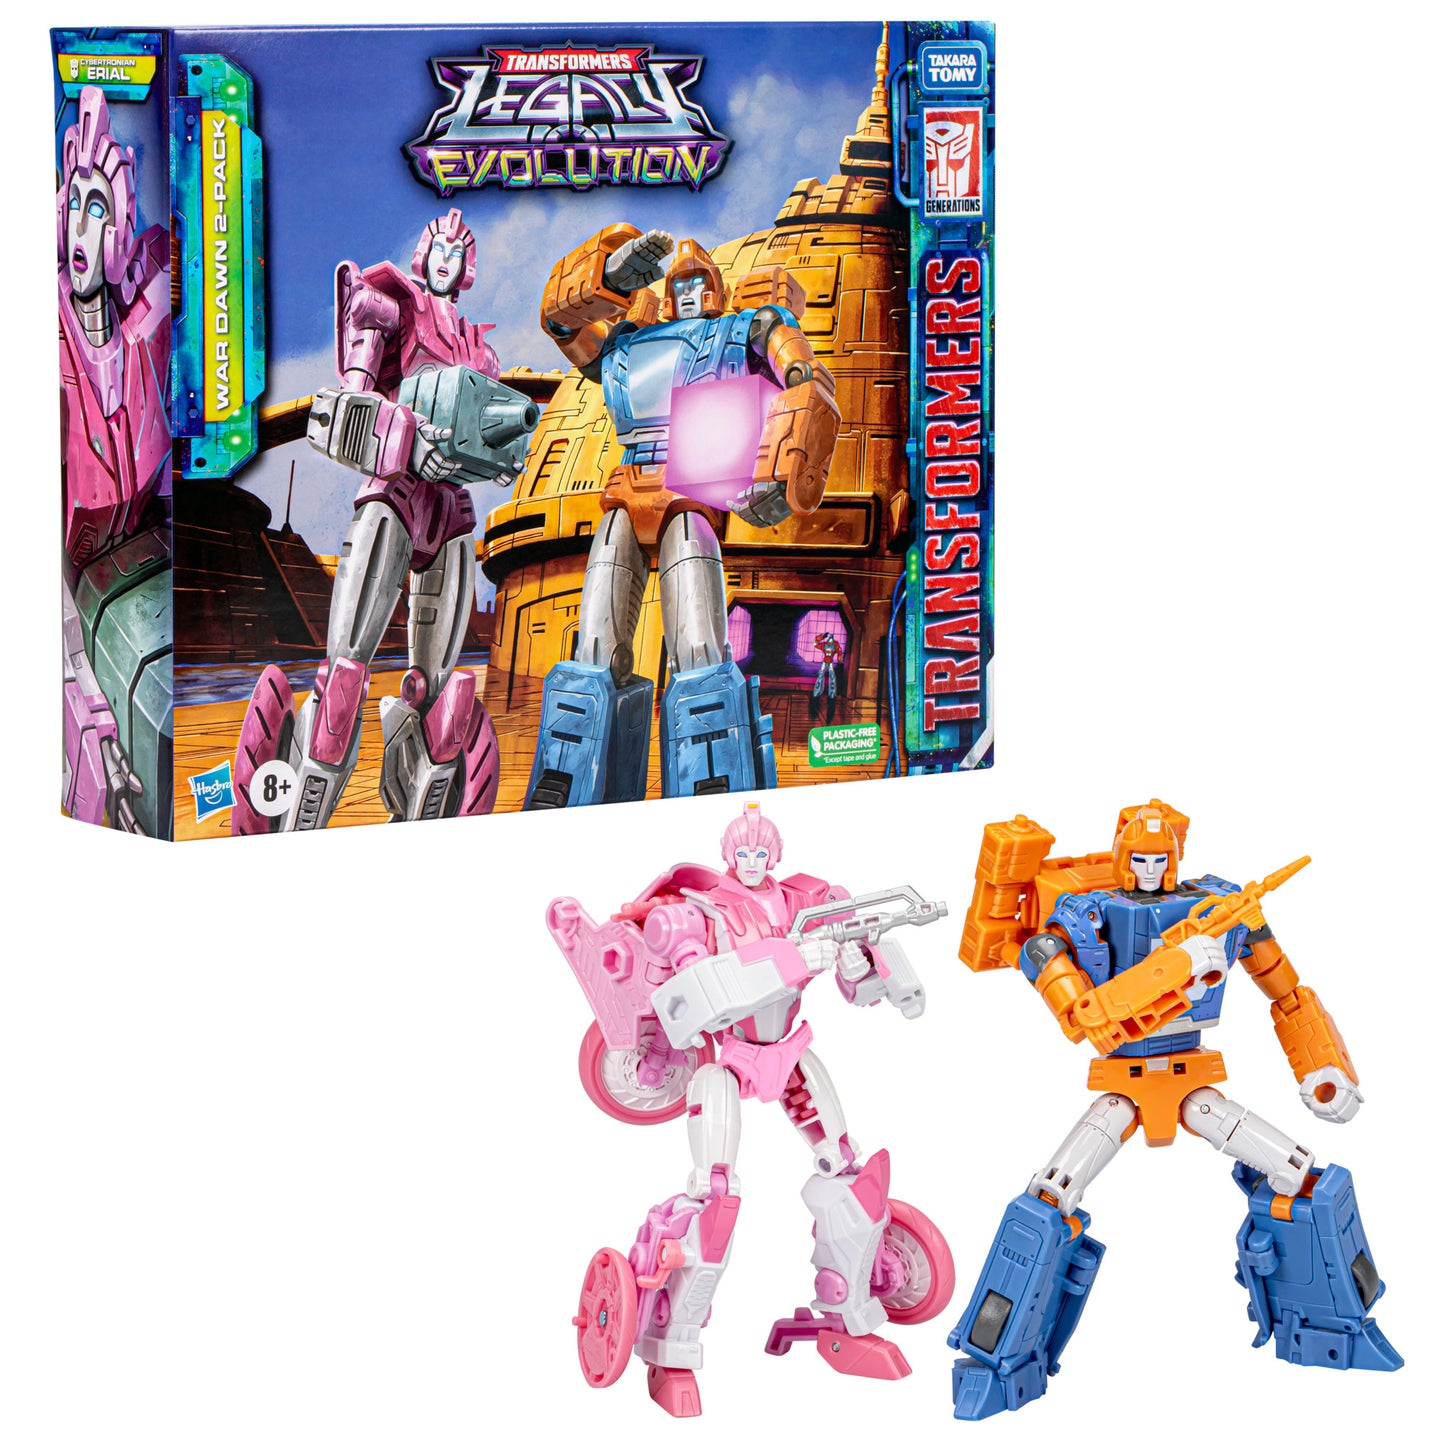 Transformers Legacy Evolution War Dawn 2-Pack Action Figure Toy - Heretoserveyou